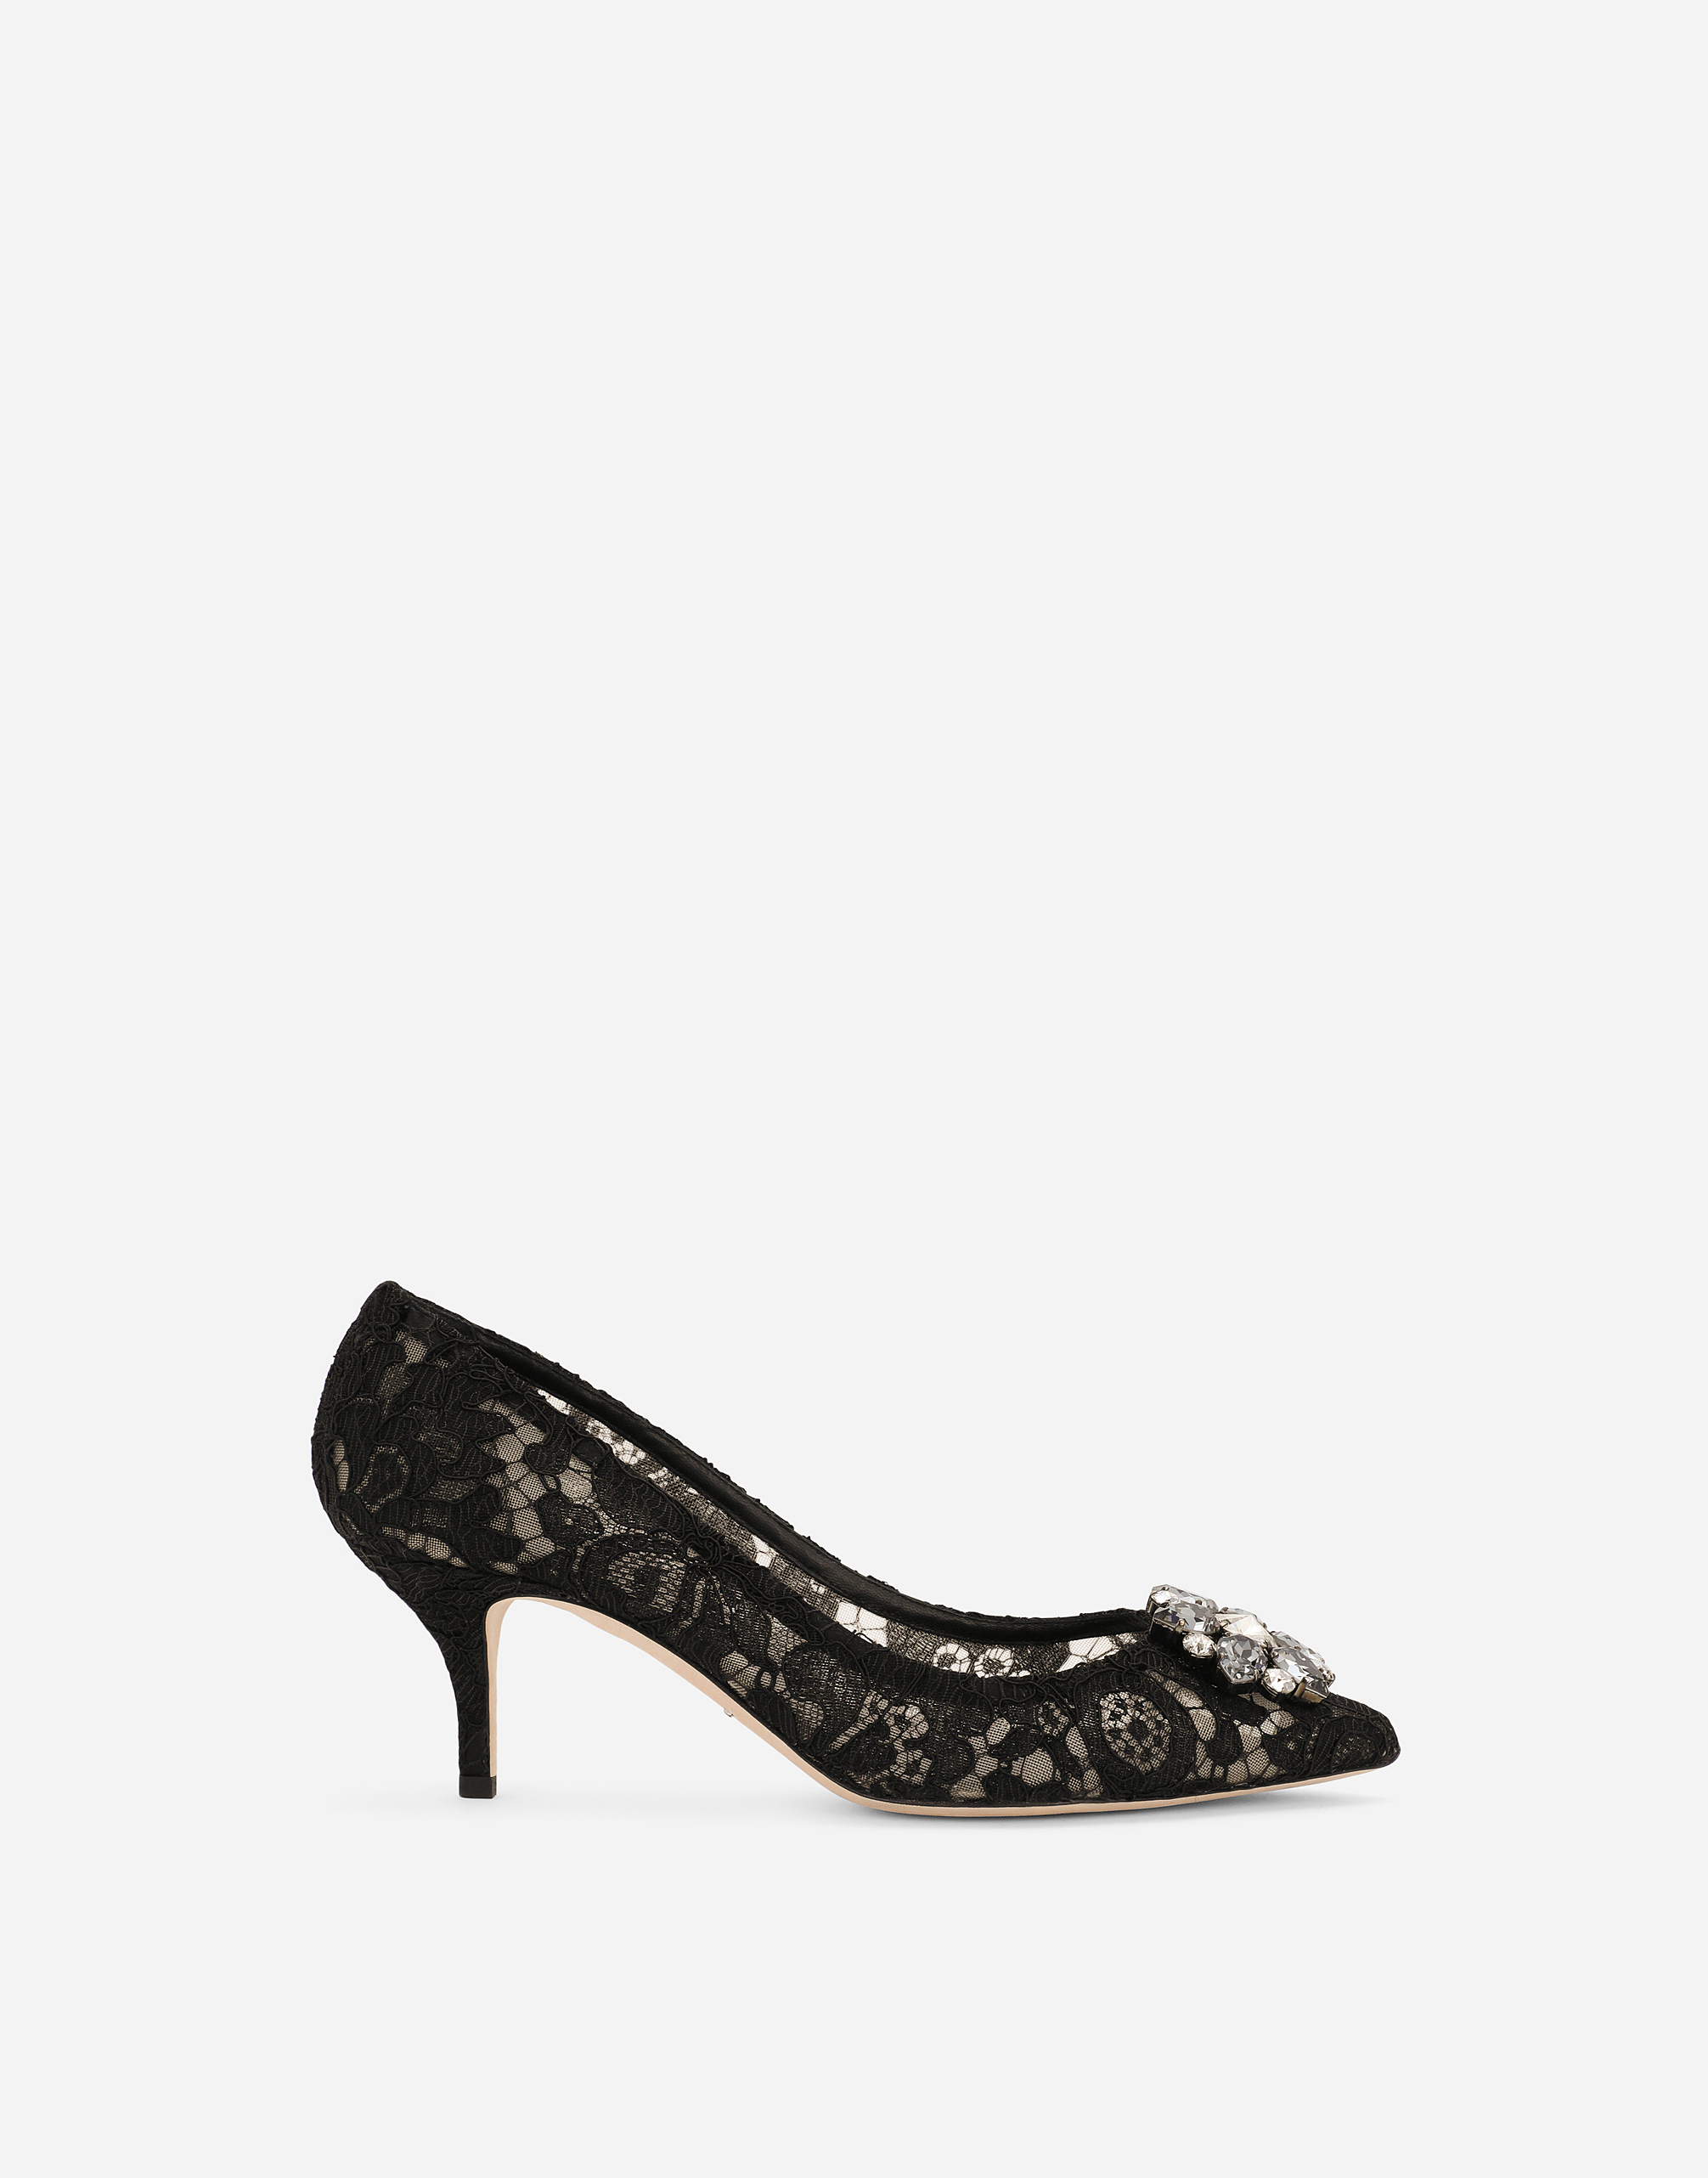 Lace rainbow pumps with brooch detailing in Black